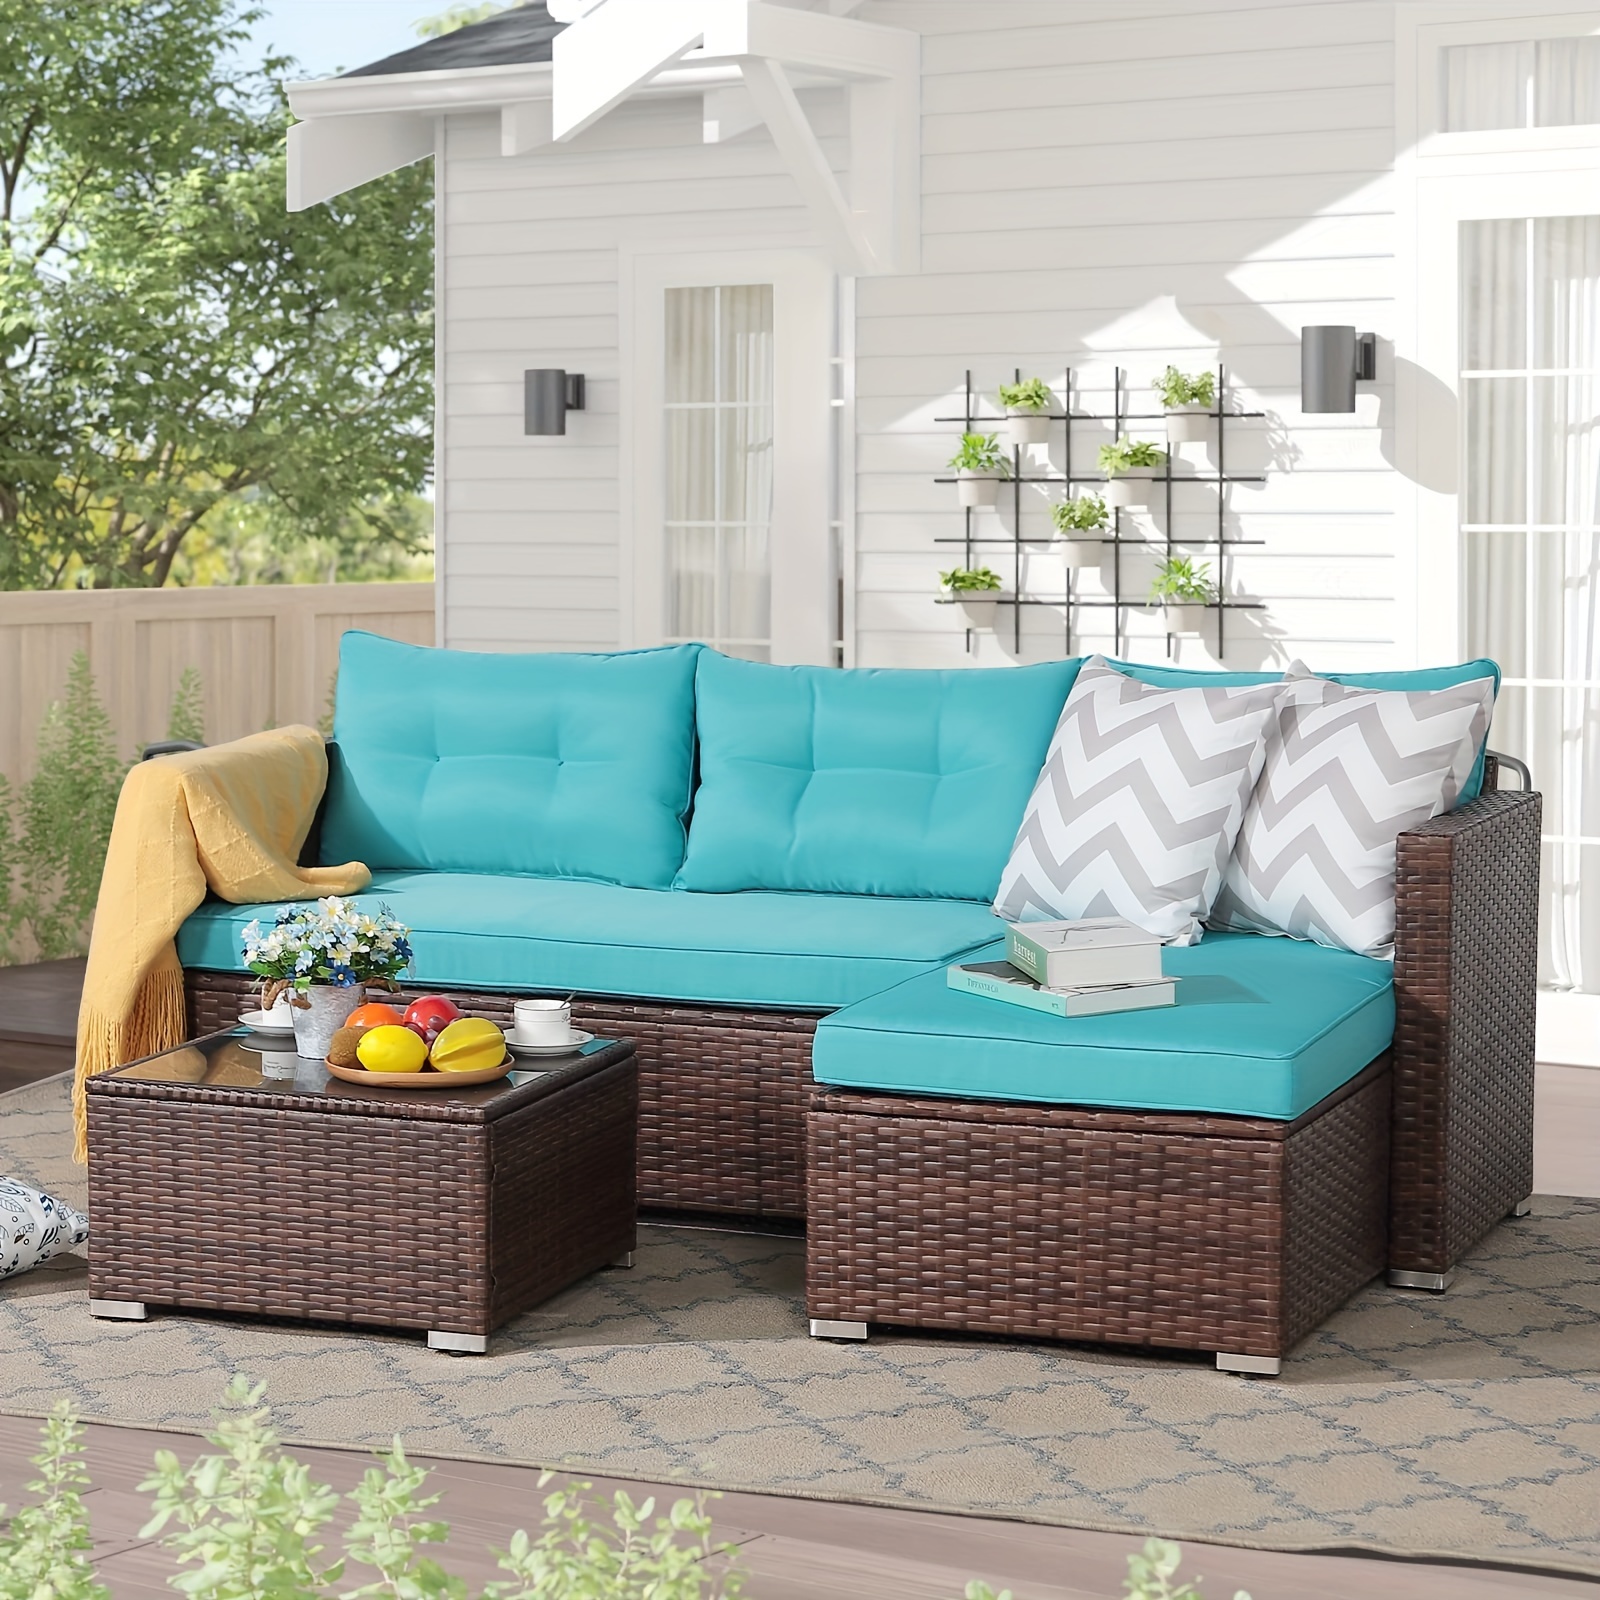 

Outdoor Wicker Patio Furniture Set, All-weather Rattan Small Sectional Sofa Set And Chaise Lounge With Glass Coffee Table, L-shaped Patio Conversation Set For Deck Balcony Porch, Blue Cushion